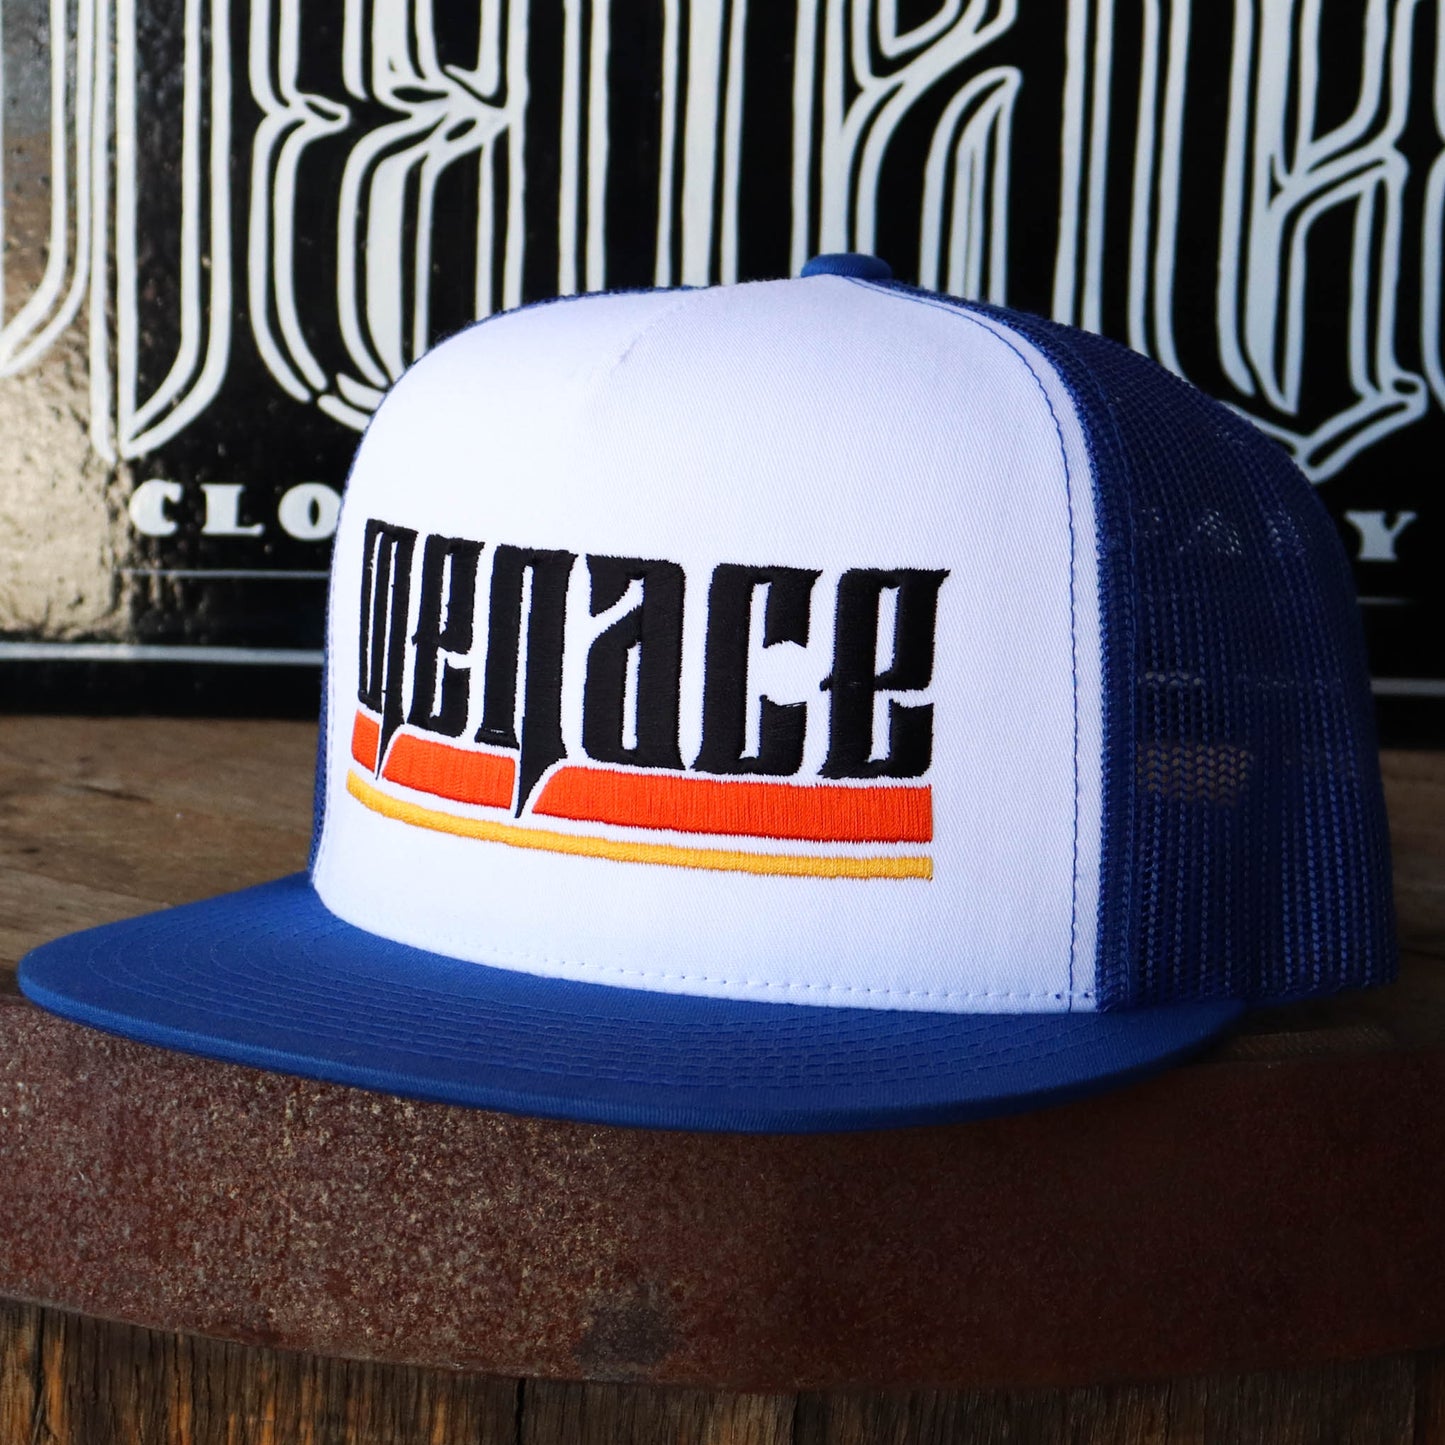 Royal blue mesh snap back hat with embroidered Menace in black, underlined by orange and yellow lines. Slightly turned to the left.